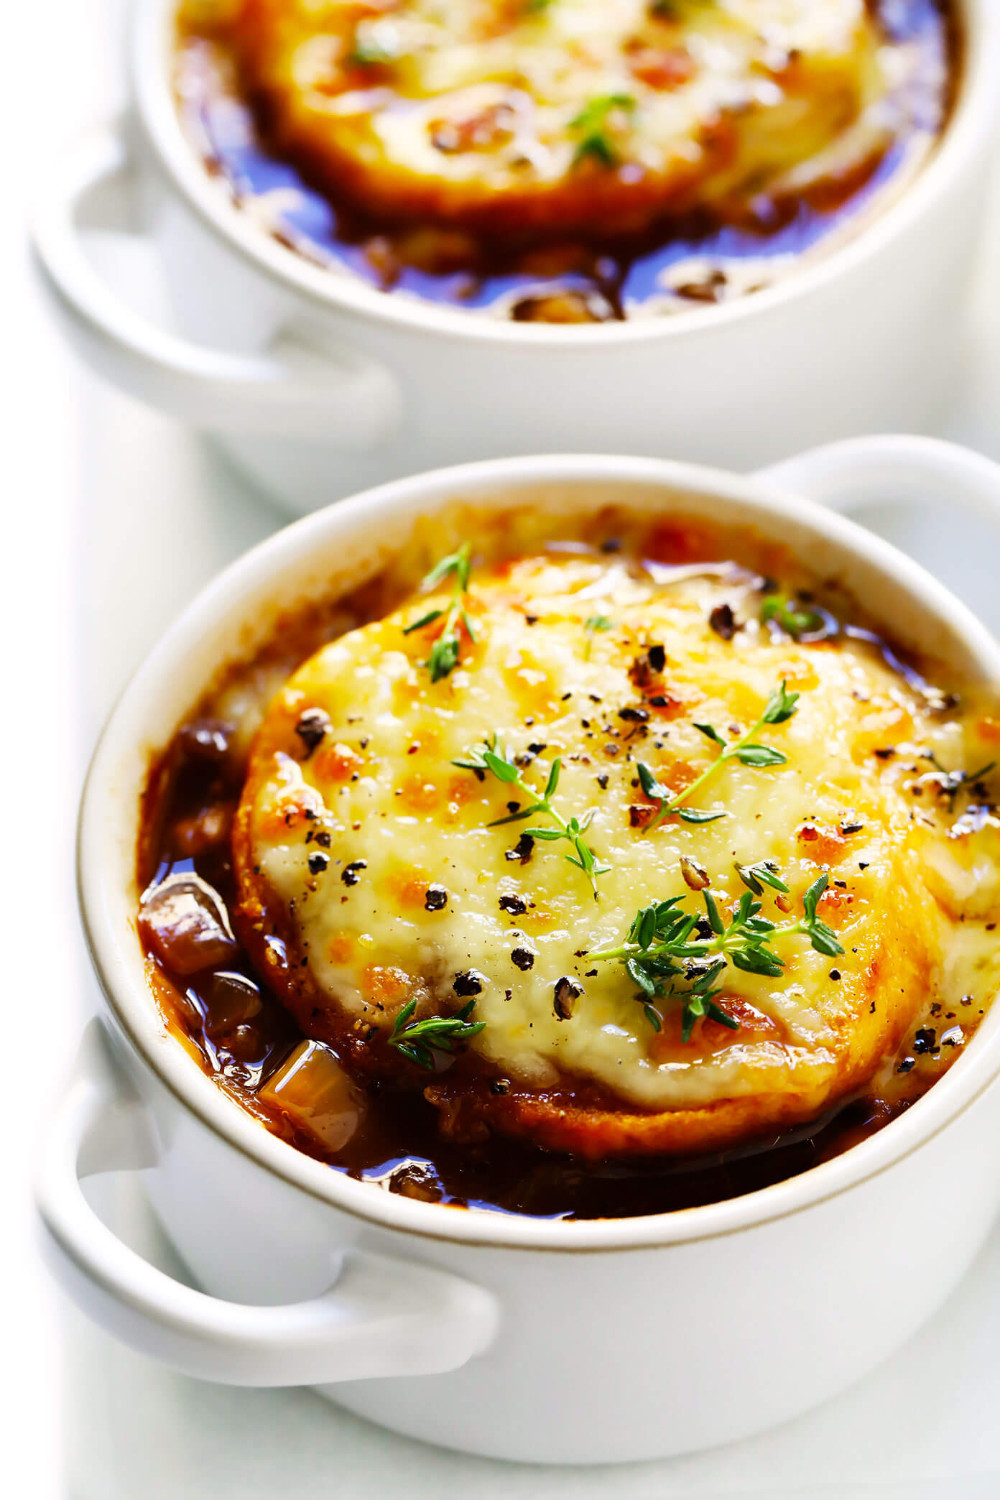 Traditional French Onion Soup Recipes Gourmet
 French ion Soup Recipe